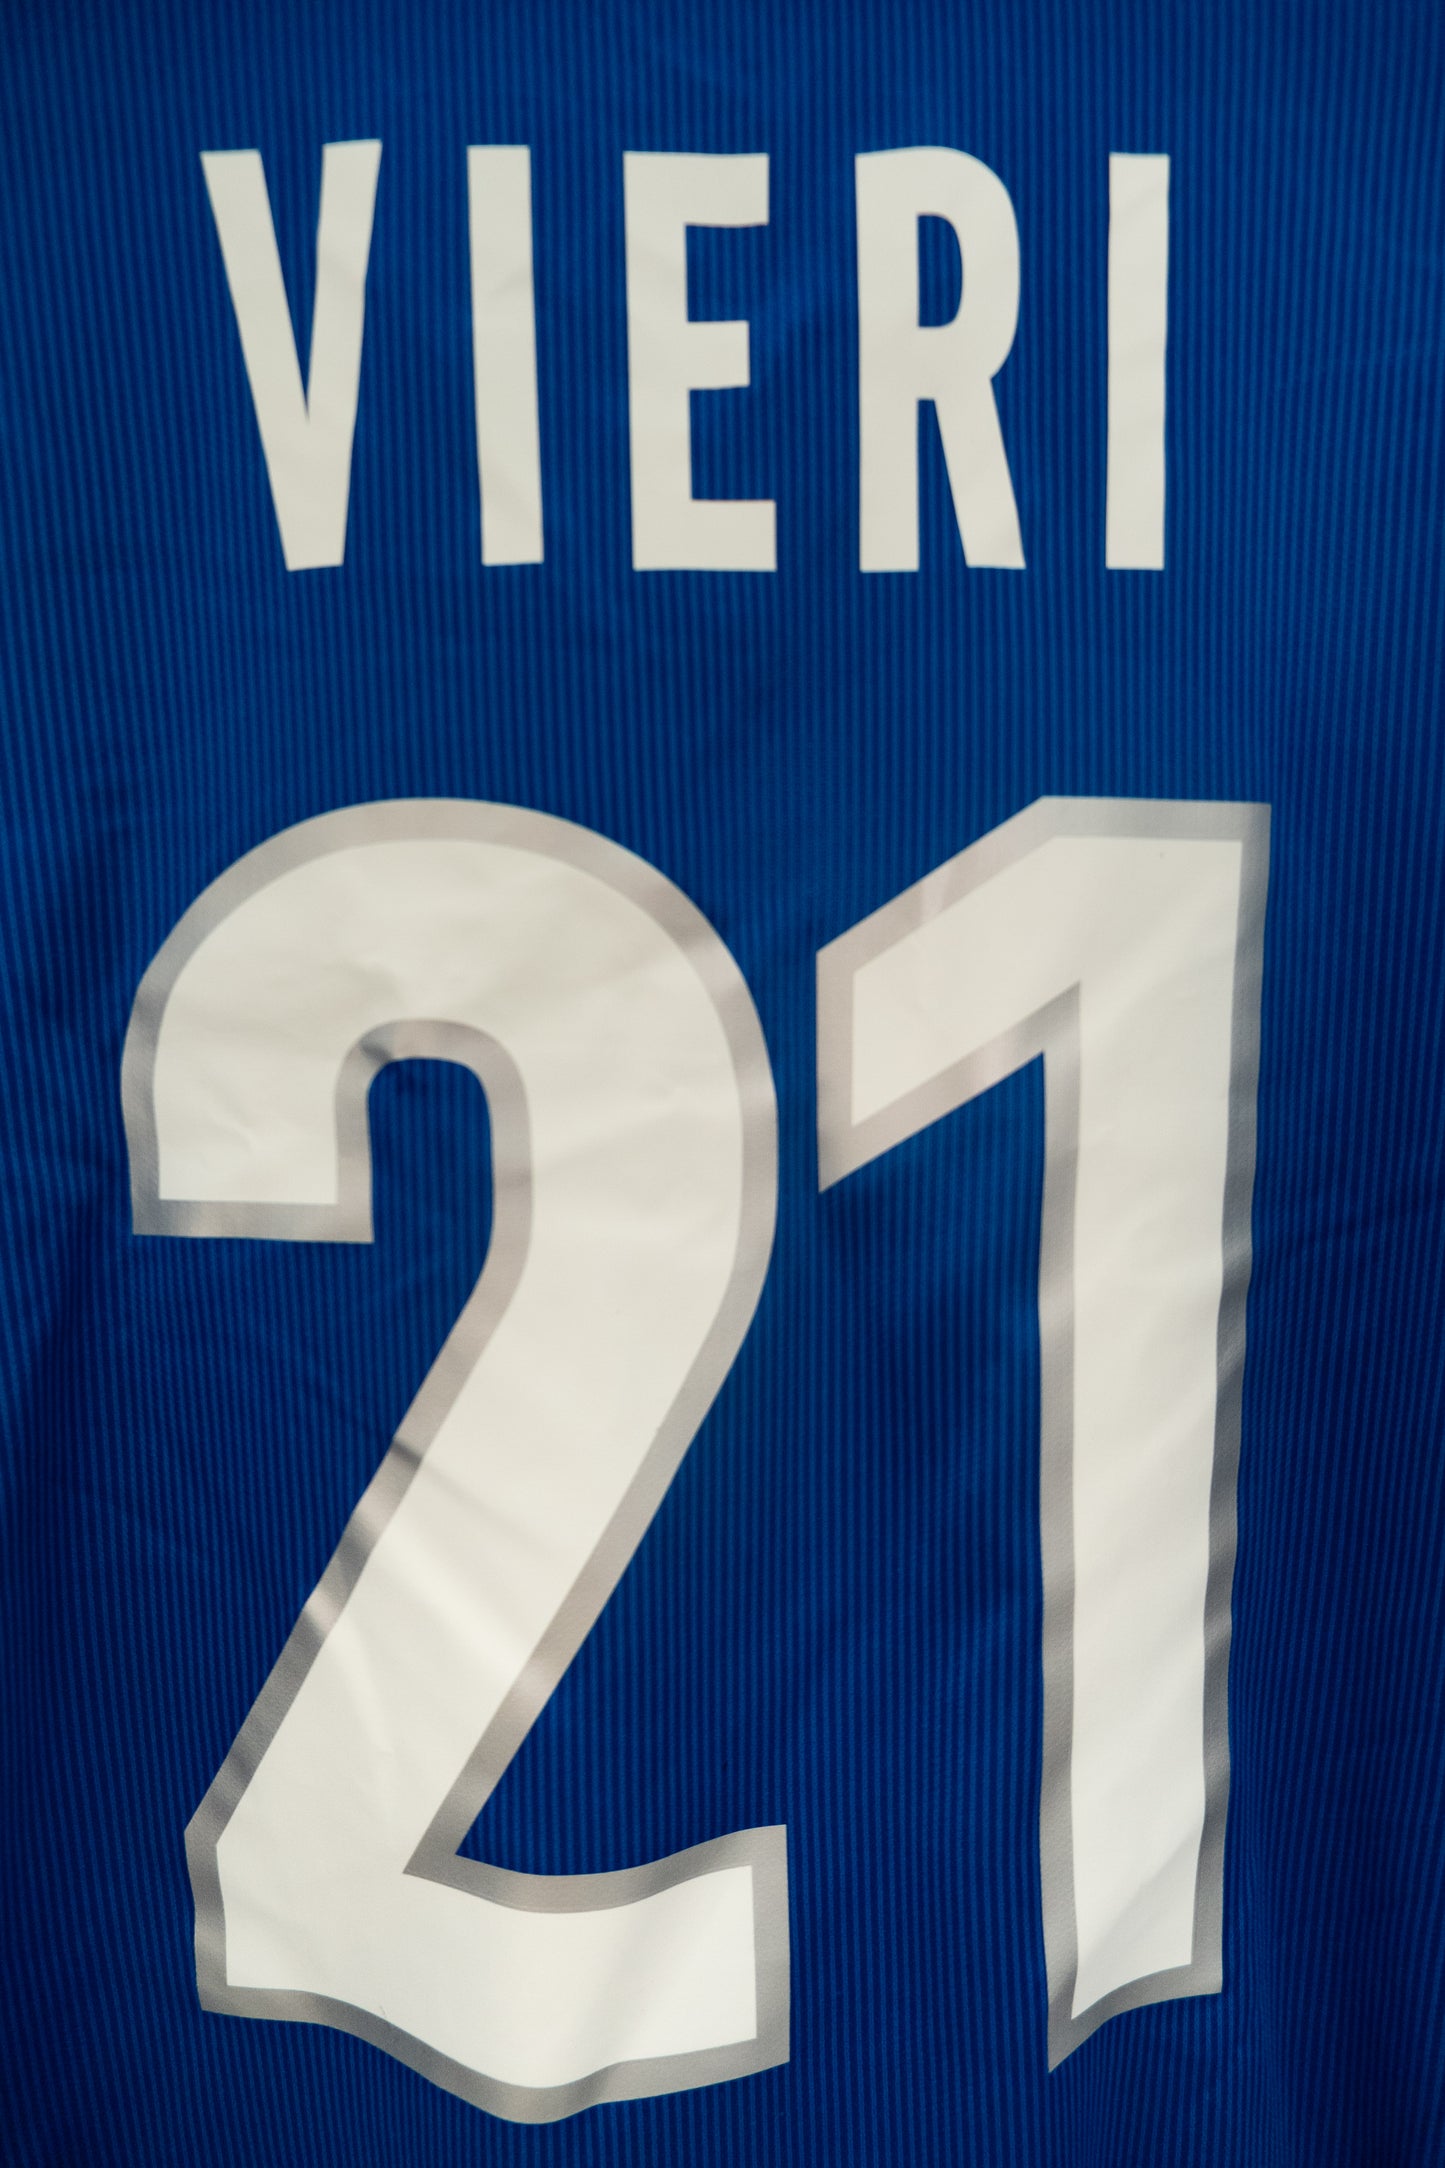 Authentic Italy 1998 Home Jersey - Christian Vieri #21 size M